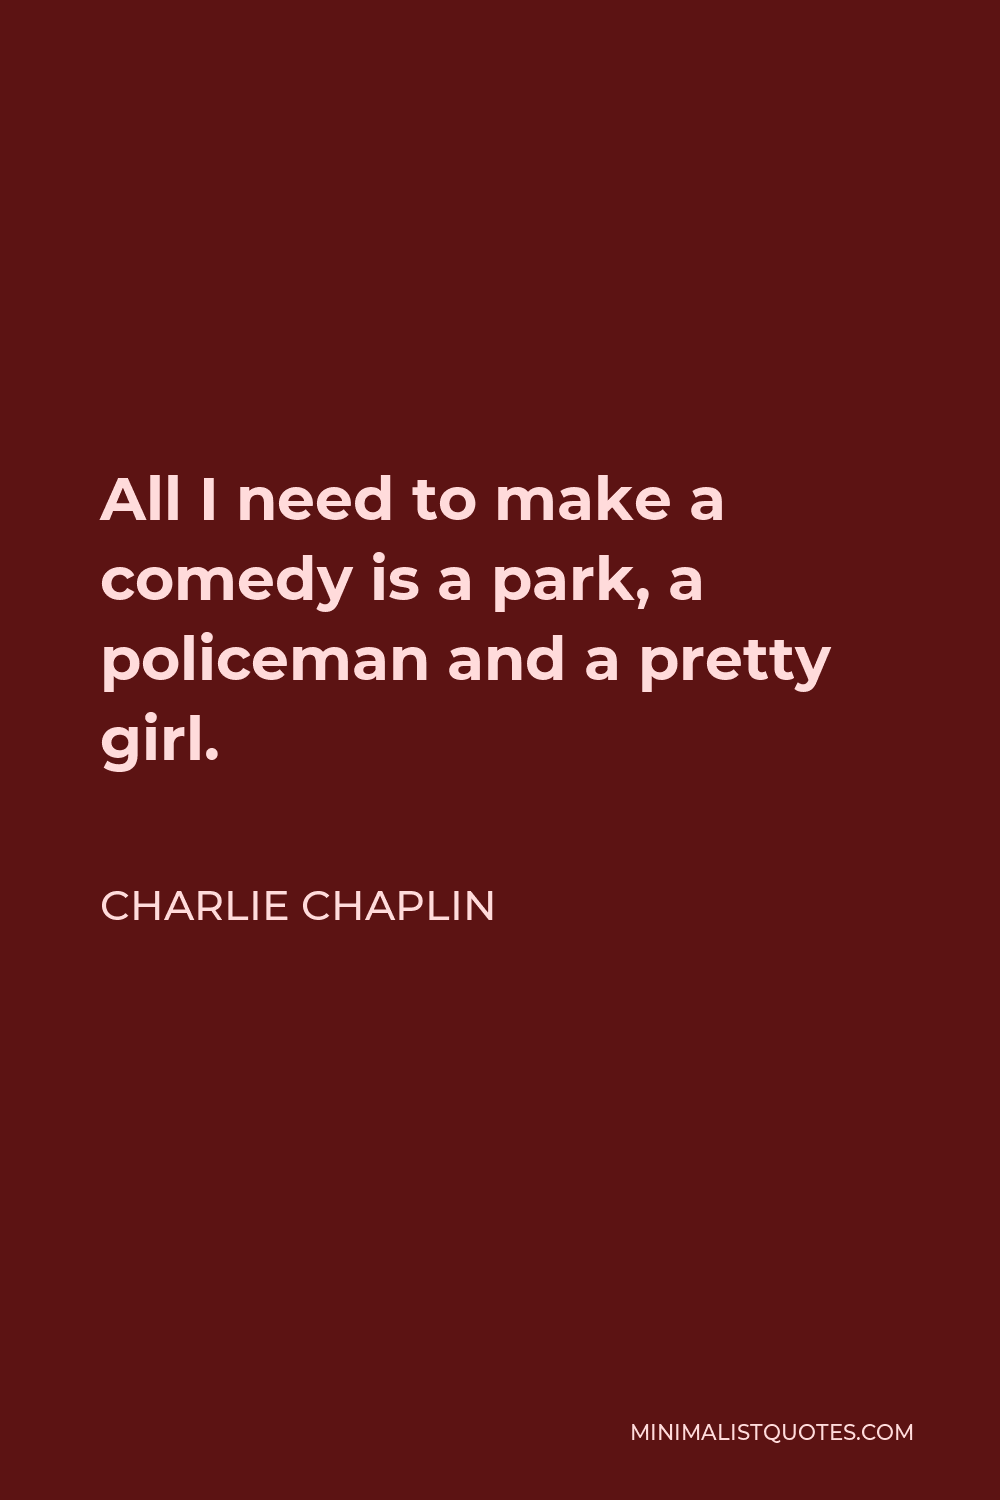 Charlie Chaplin Quote - All I need to make a comedy is a park, a policeman and a pretty girl.